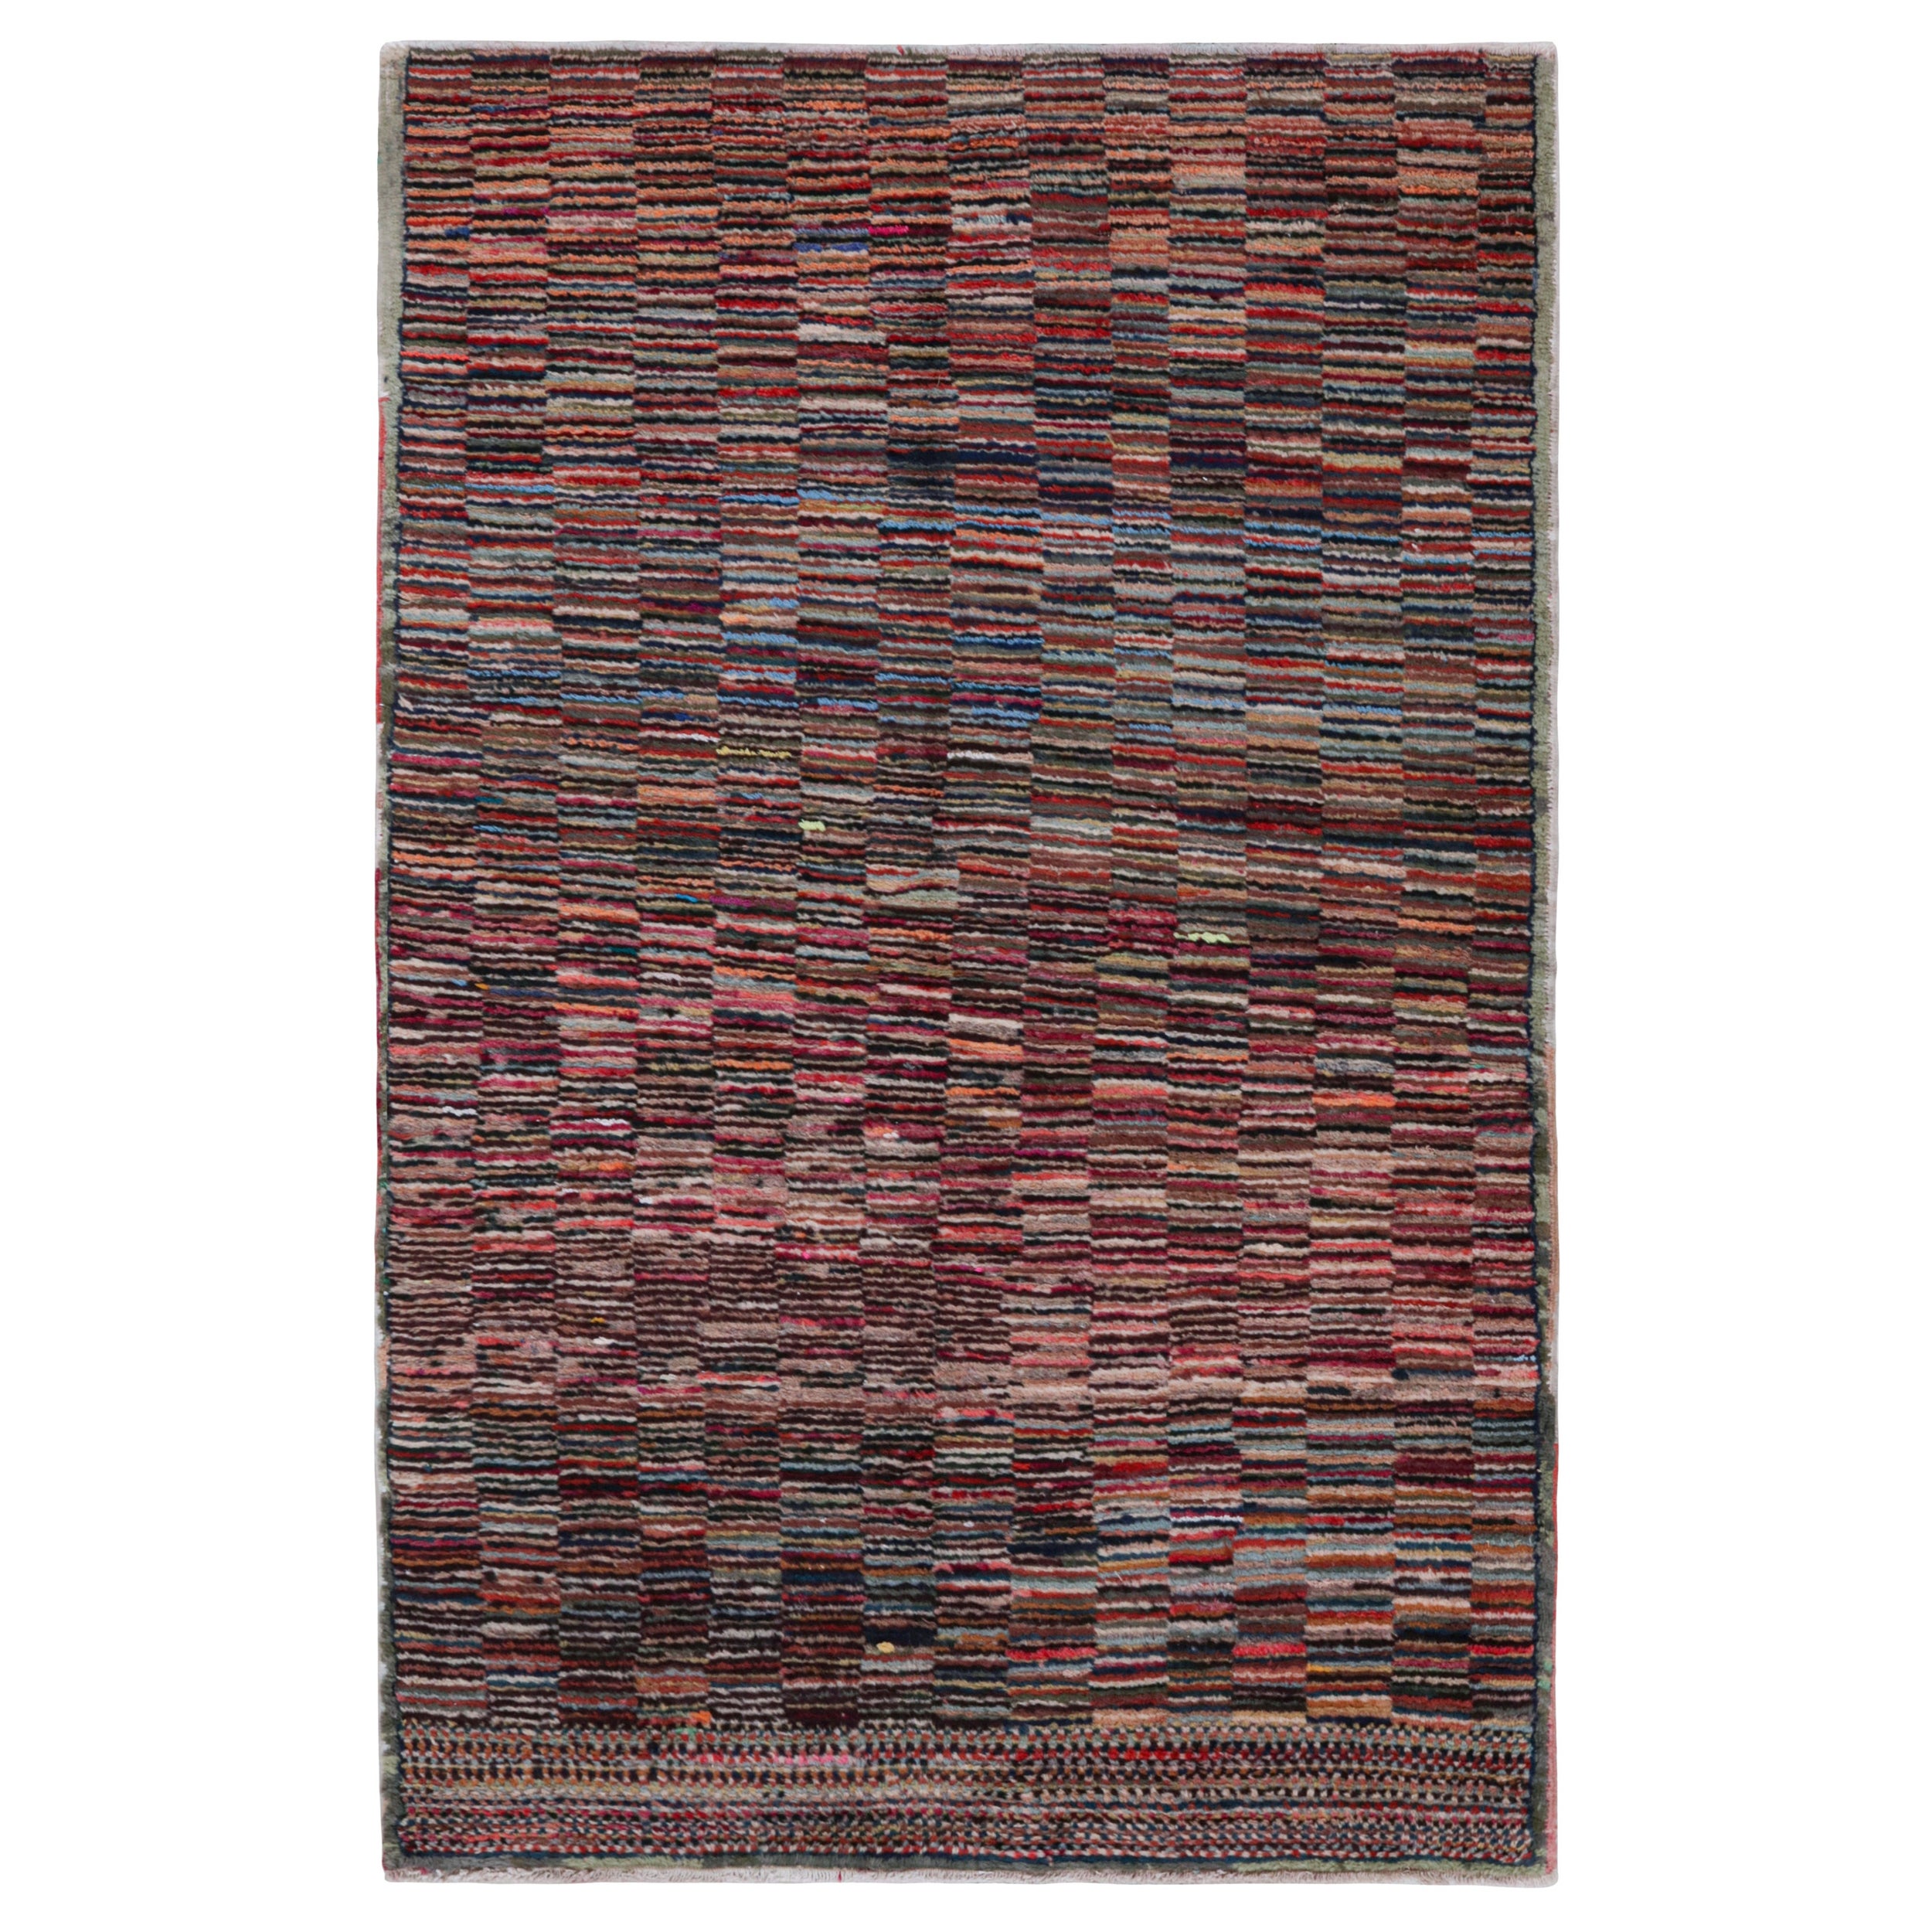 Vintage Zeki Muren Polychromatic Rug, with Geometric patterns, from Rug & Kilim For Sale